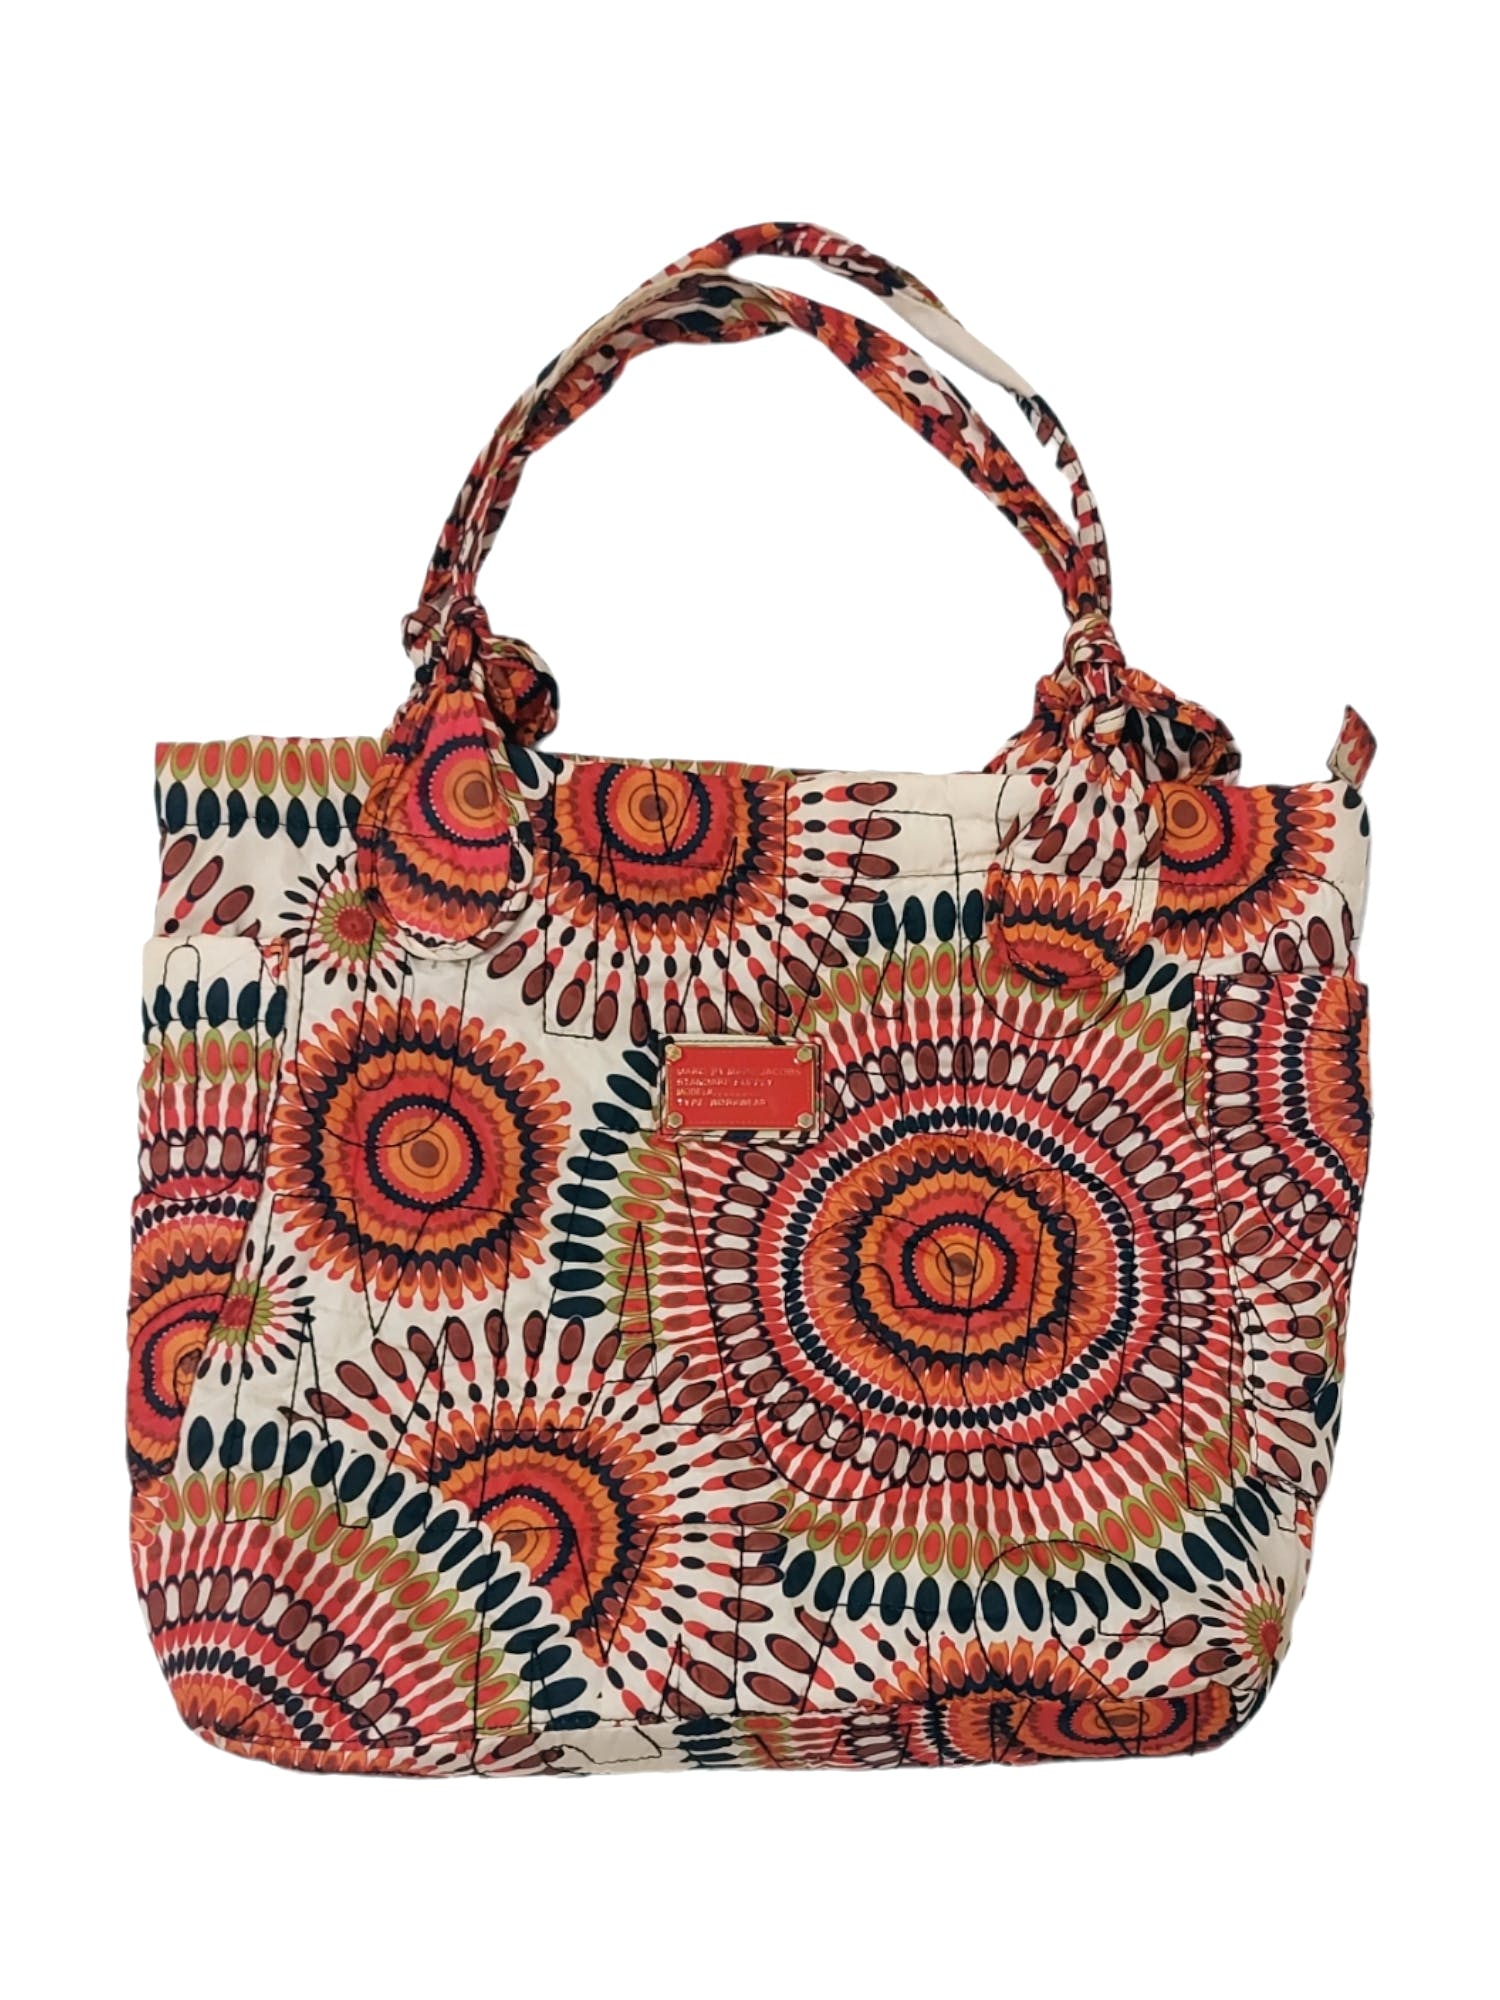 RARE! MARC by MARC JACOBS PSYCHEDELIC HIPPIES HOBO BAG - 1